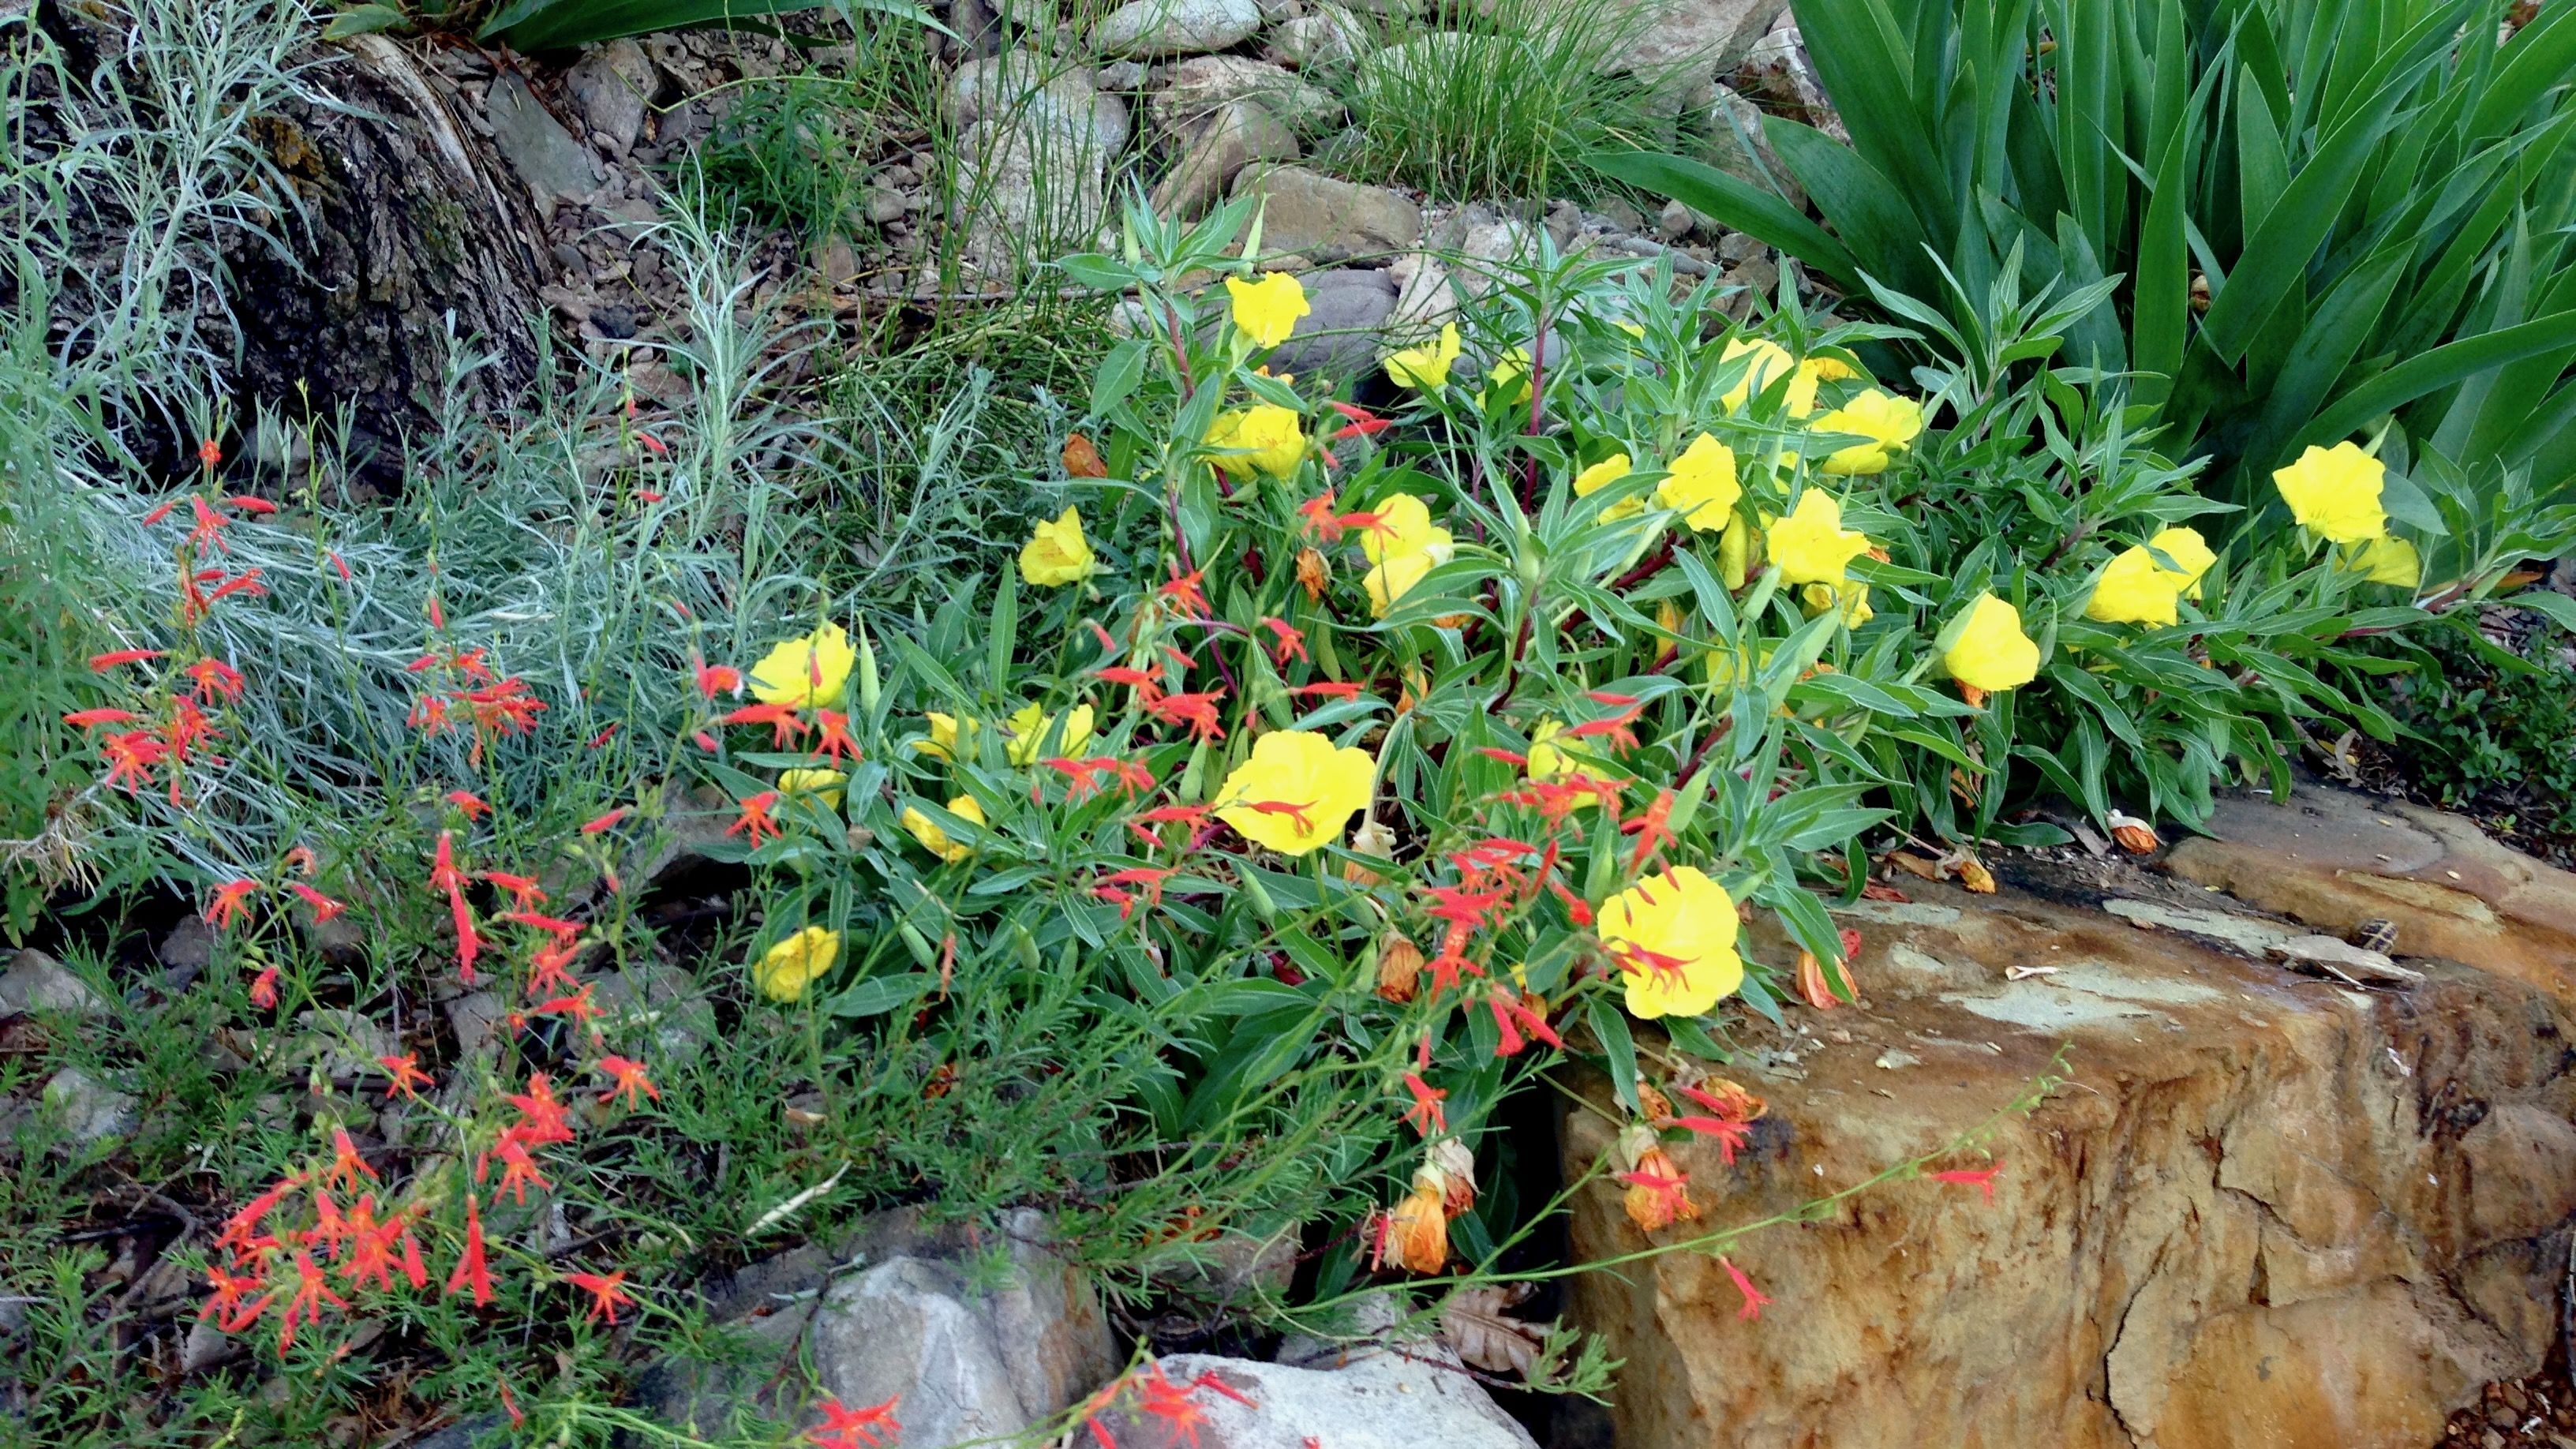 Yellow and red flowers grow in a rock garden.